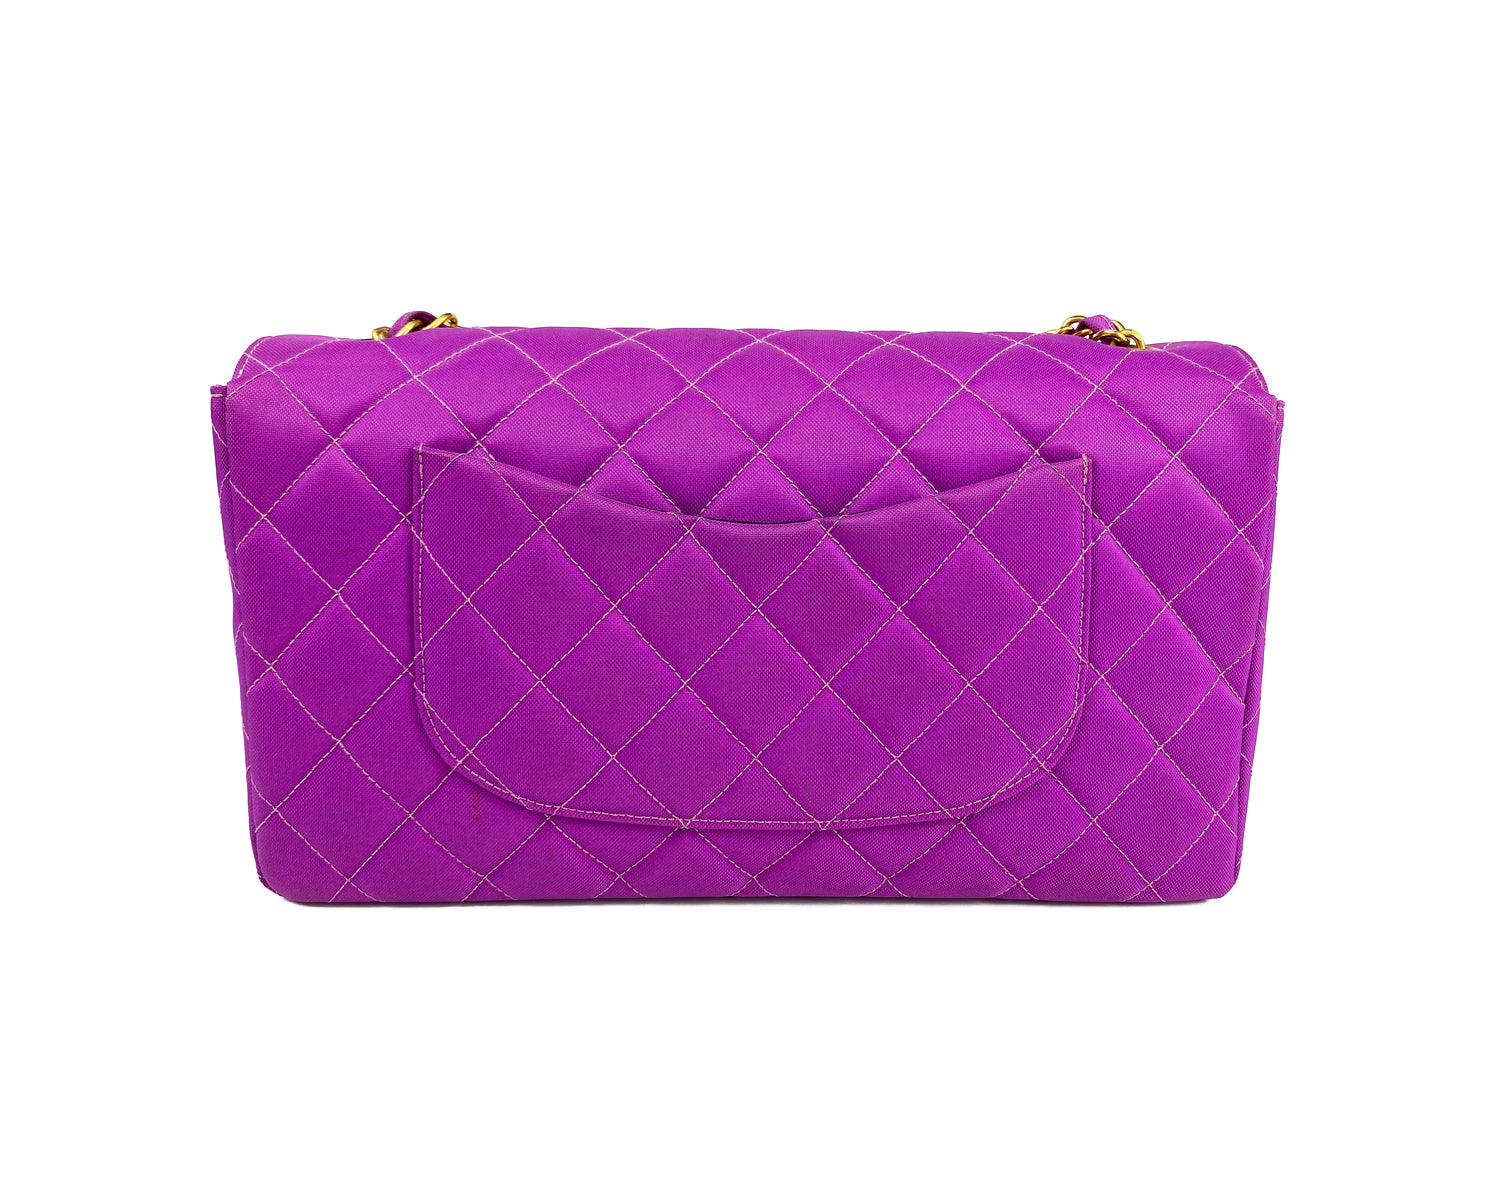 Fruit Vintage classic Chanel quilted nylon flap bag in extremely rare purple nylon, dating to 1995. Features the classic Chanel flap structure with contrast pale purple stitching and matte gold hardware.